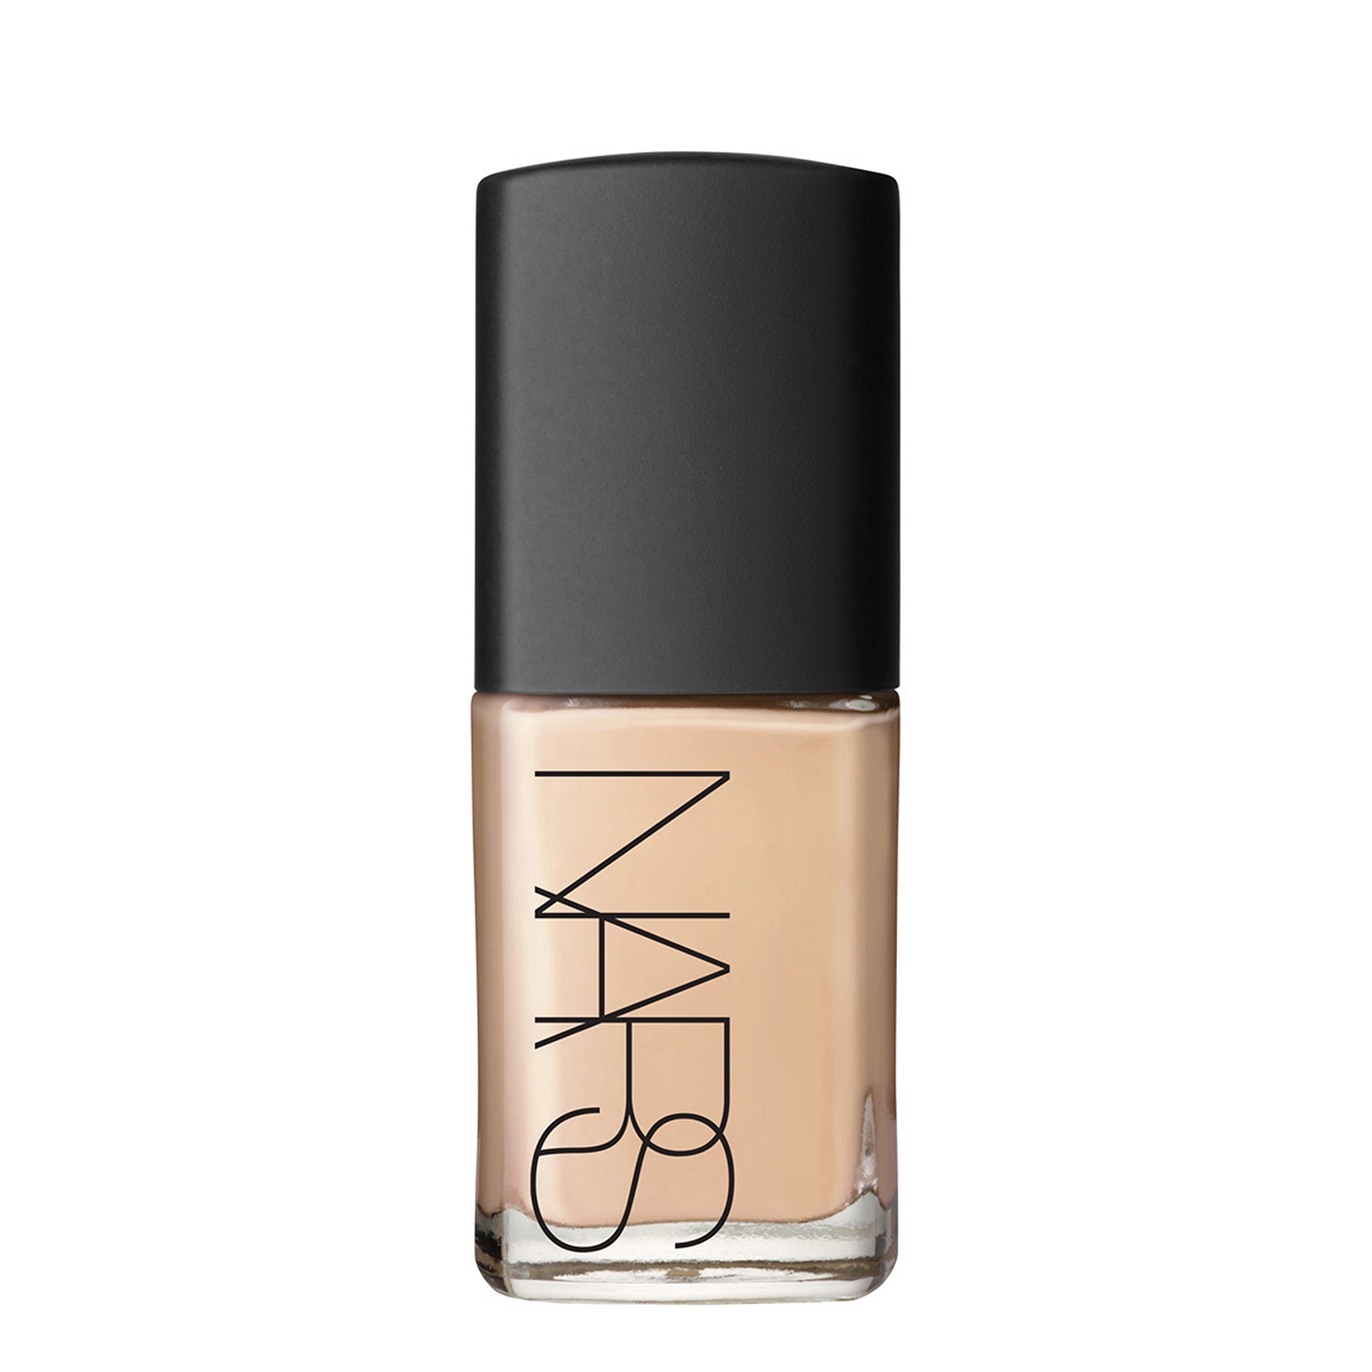 Nars Sheer Glow Foundation - Deauville